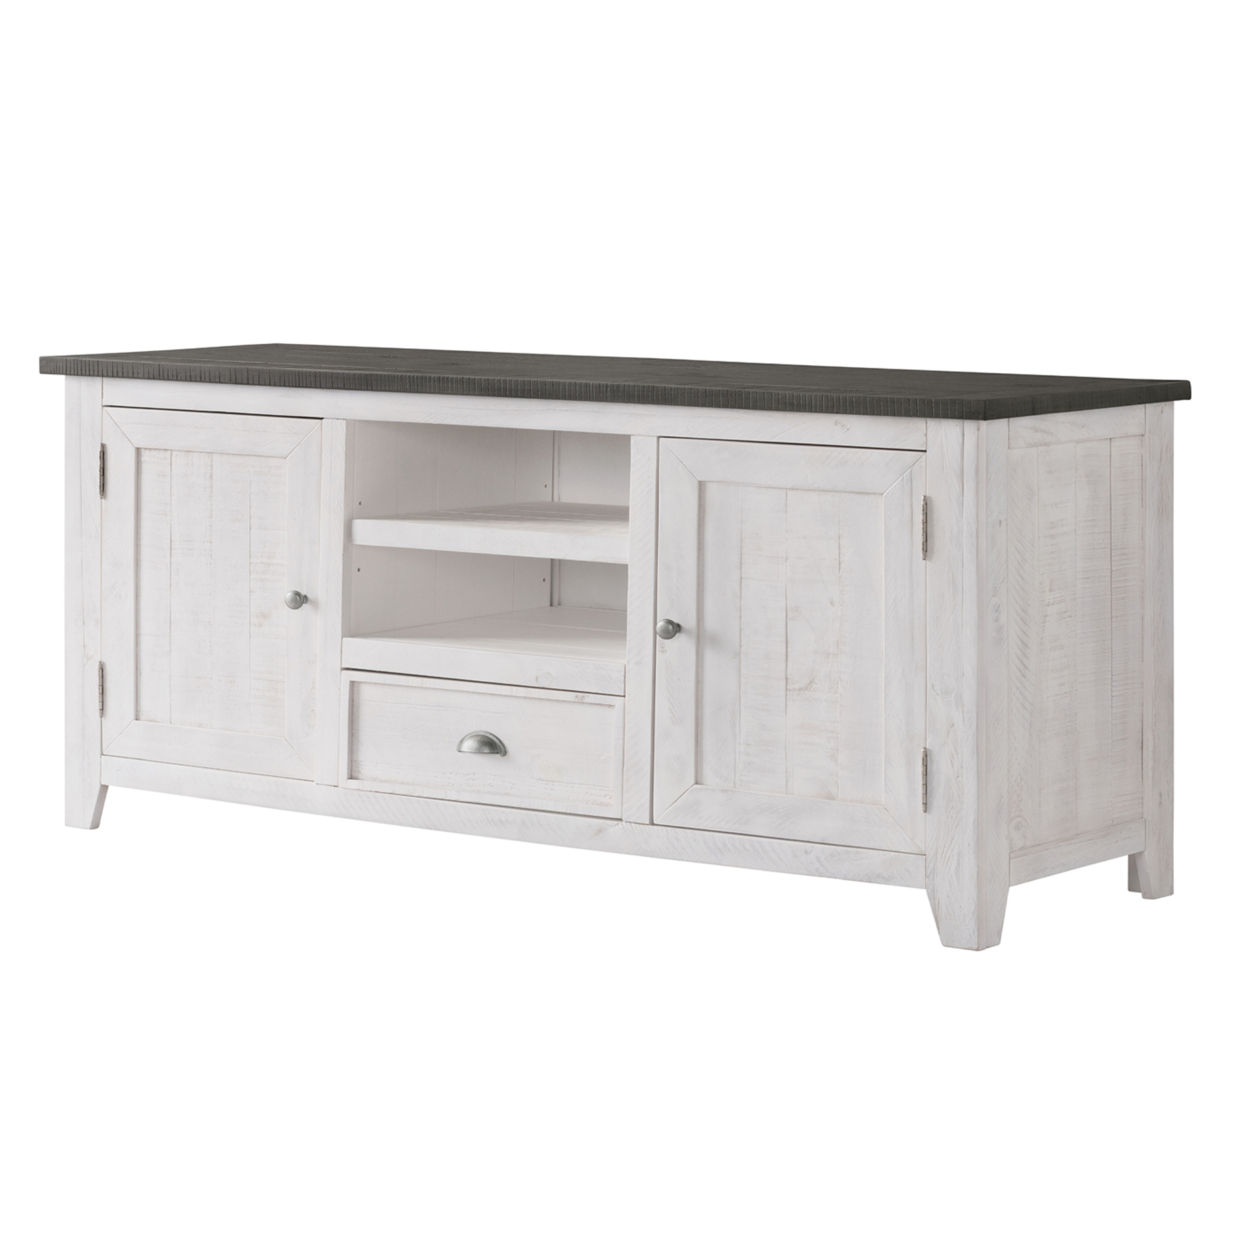 Coastal Wooden TV Stand With 2 Cabinets And 1 Drawer, White And Gray- Saltoro Sherpi